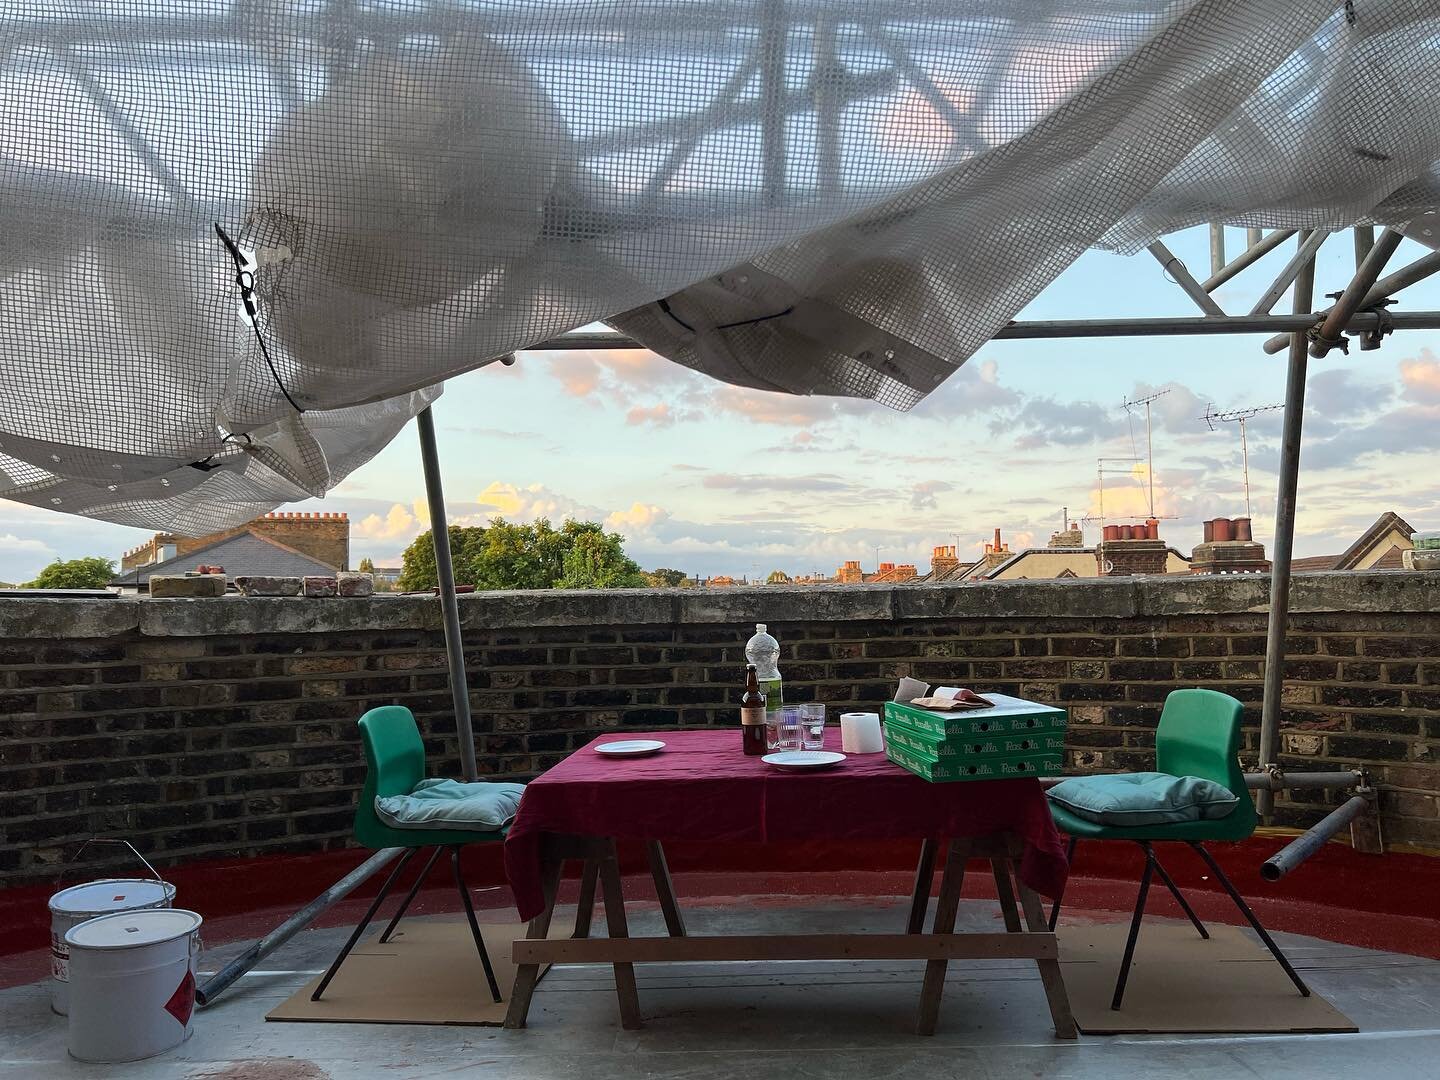 Summer 2023
#renovation #groveendhouse #nw5

1. Pizza at dusk on the Belvedere with @umipawlyn @michaelpawlyn 
2. Hedge trimming #groveendhouse photo @sol_pawlyn 
3. Blue sail, Thames Estuary #leighonsea 
4. When will the windows be in? 
5. Clover 🍀